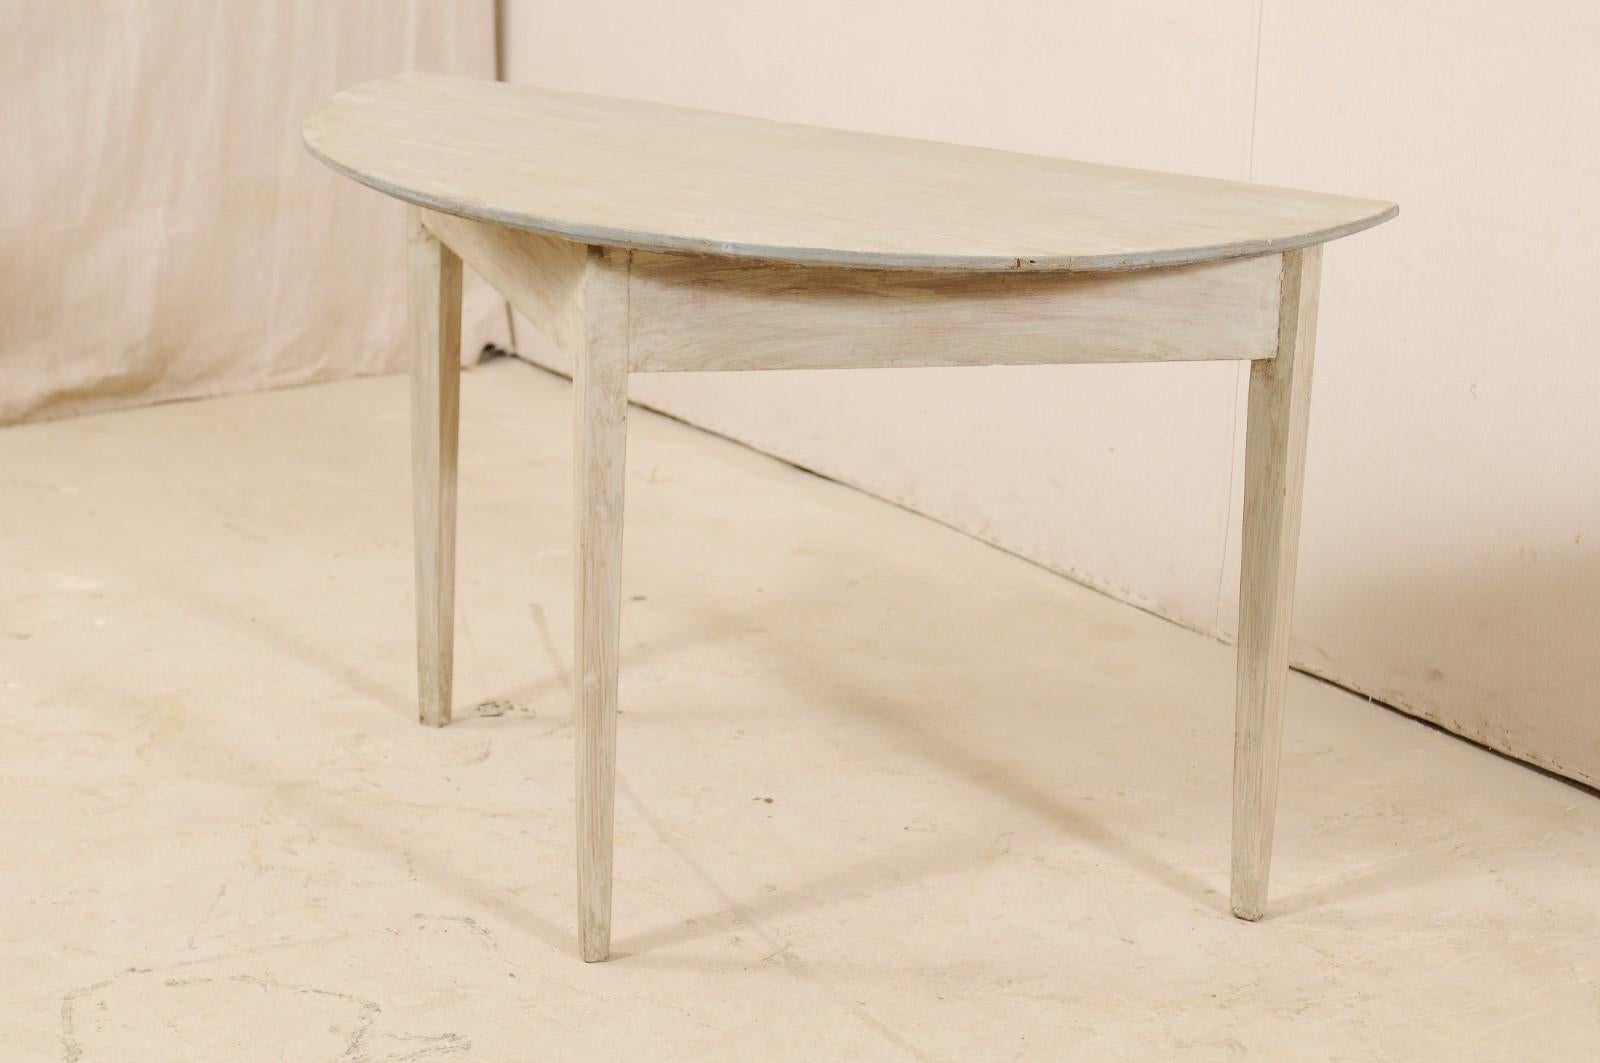 Single Swedish Demilune Table from 19th Century 5